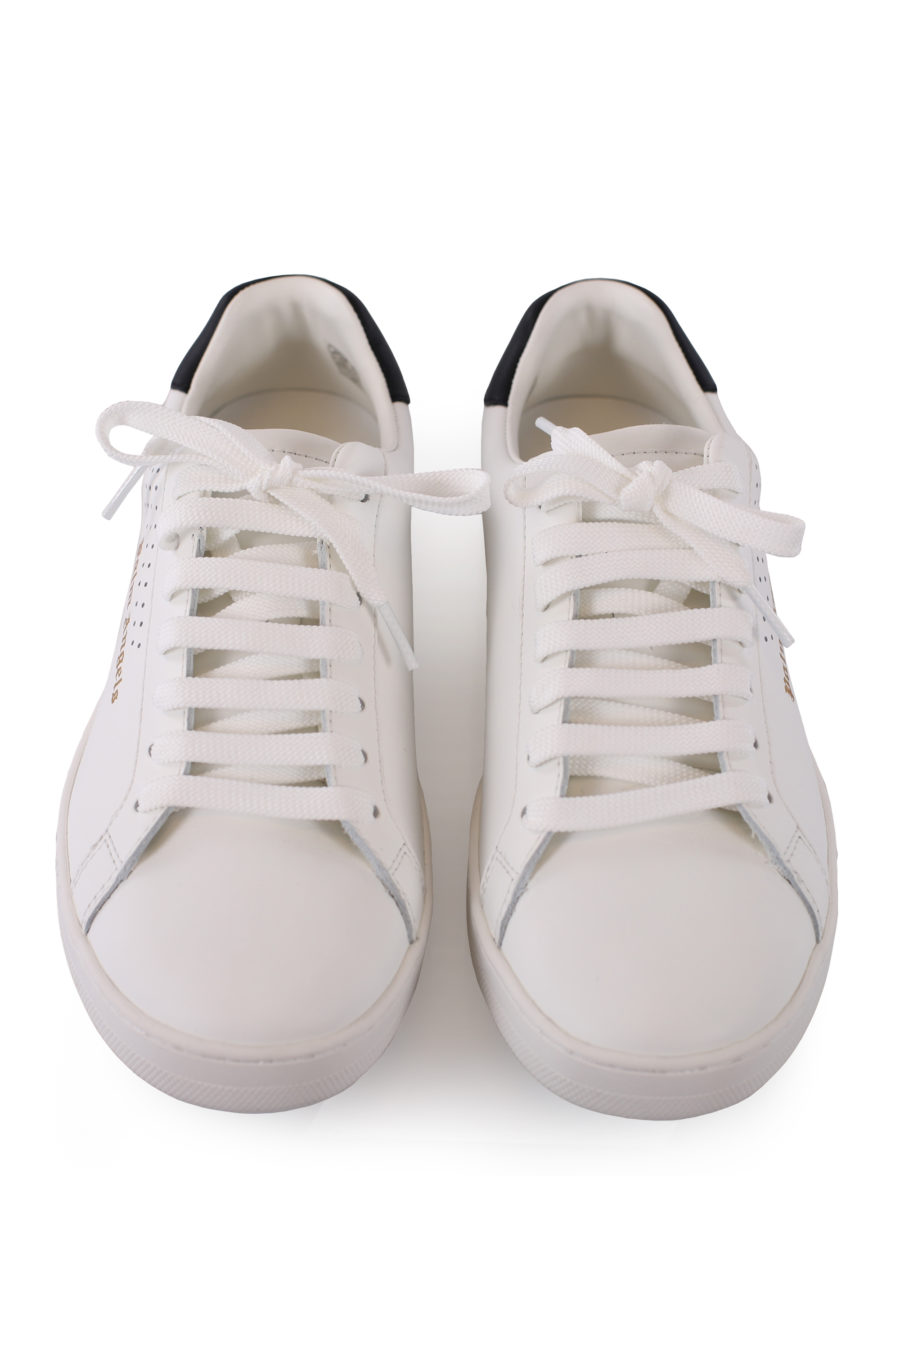 White trainers with gold logo - IMG 9009